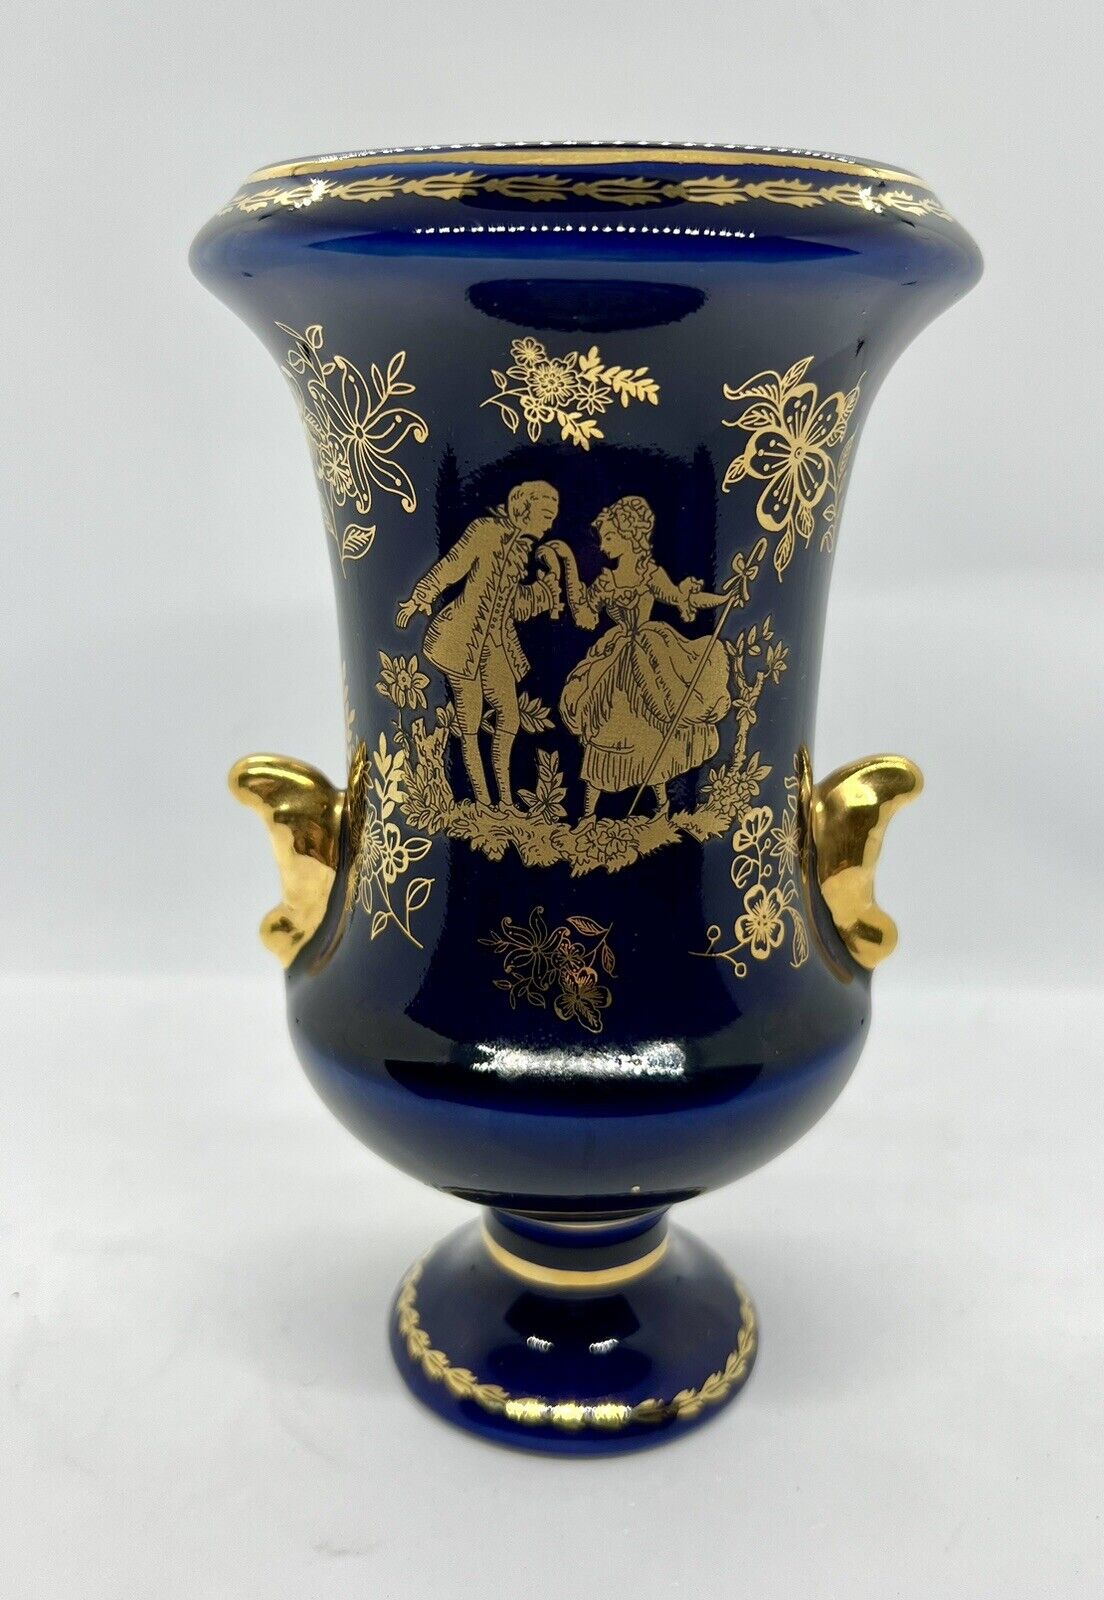 Presentti Italy Style Blue With Gold Tone Trim Porcelain Urn Style Vase